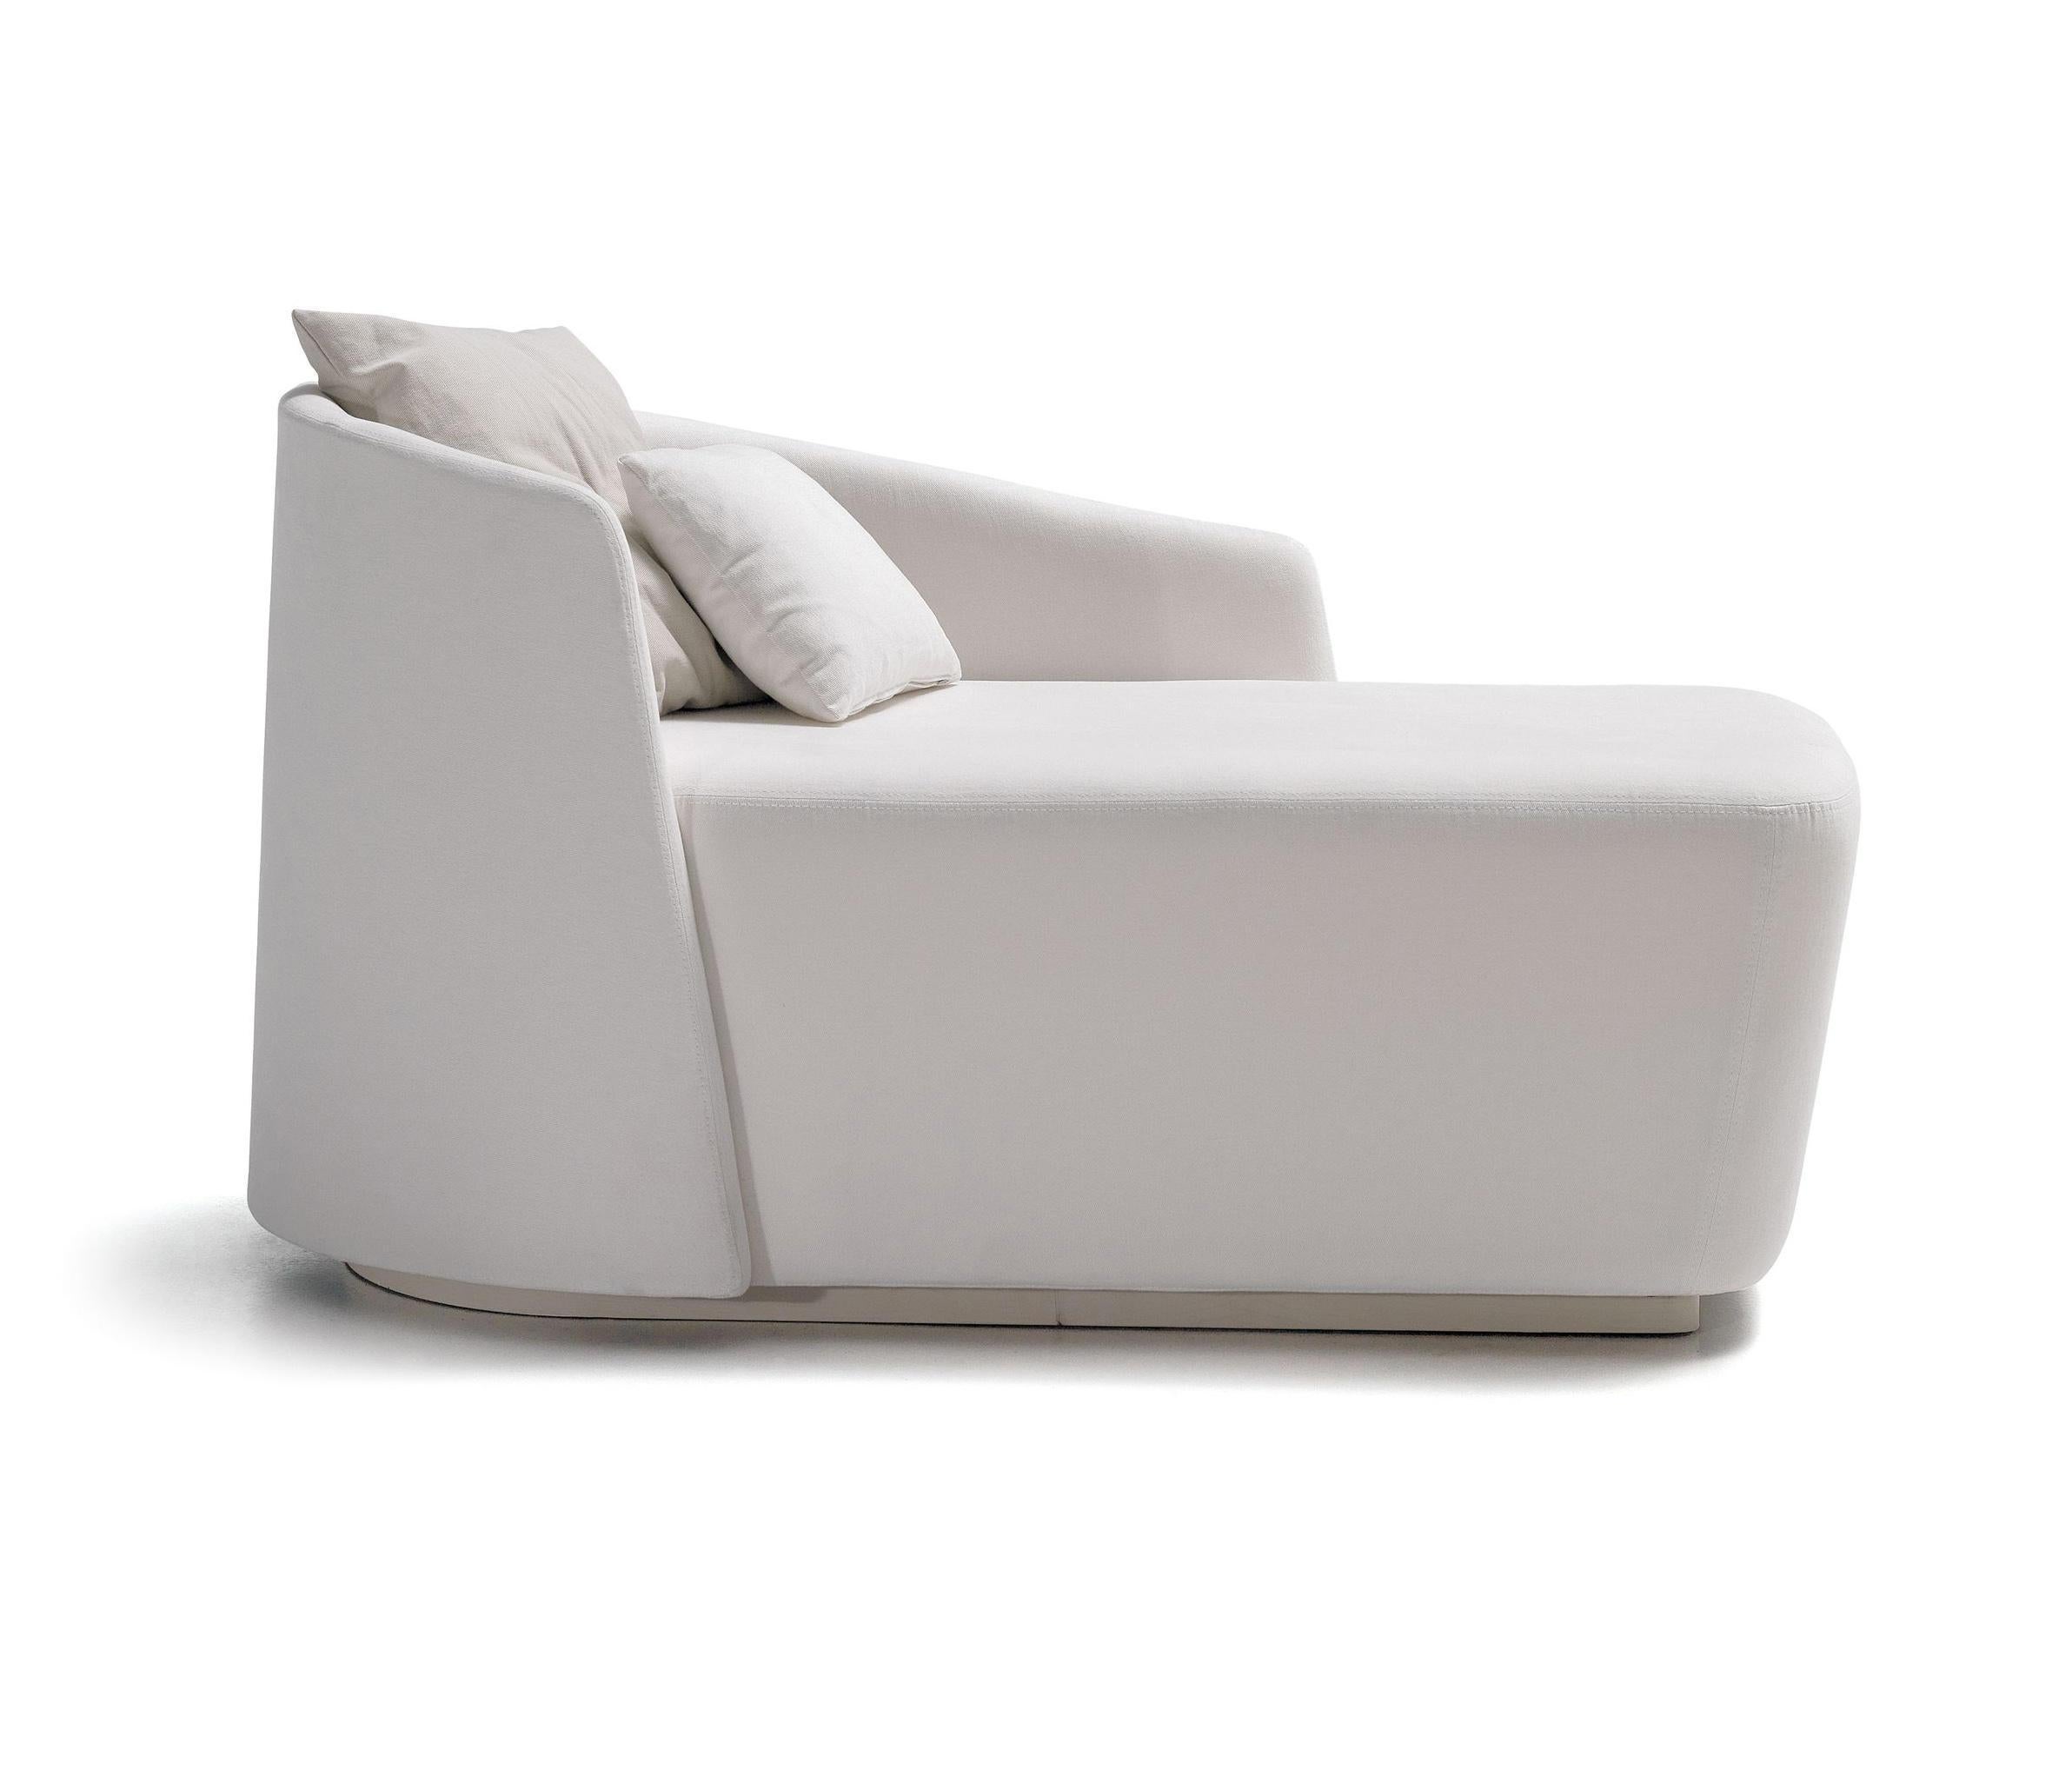 Supernatural Chaise Lounge Sofa Chair by Jorge Pensi (Moderne) im Angebot